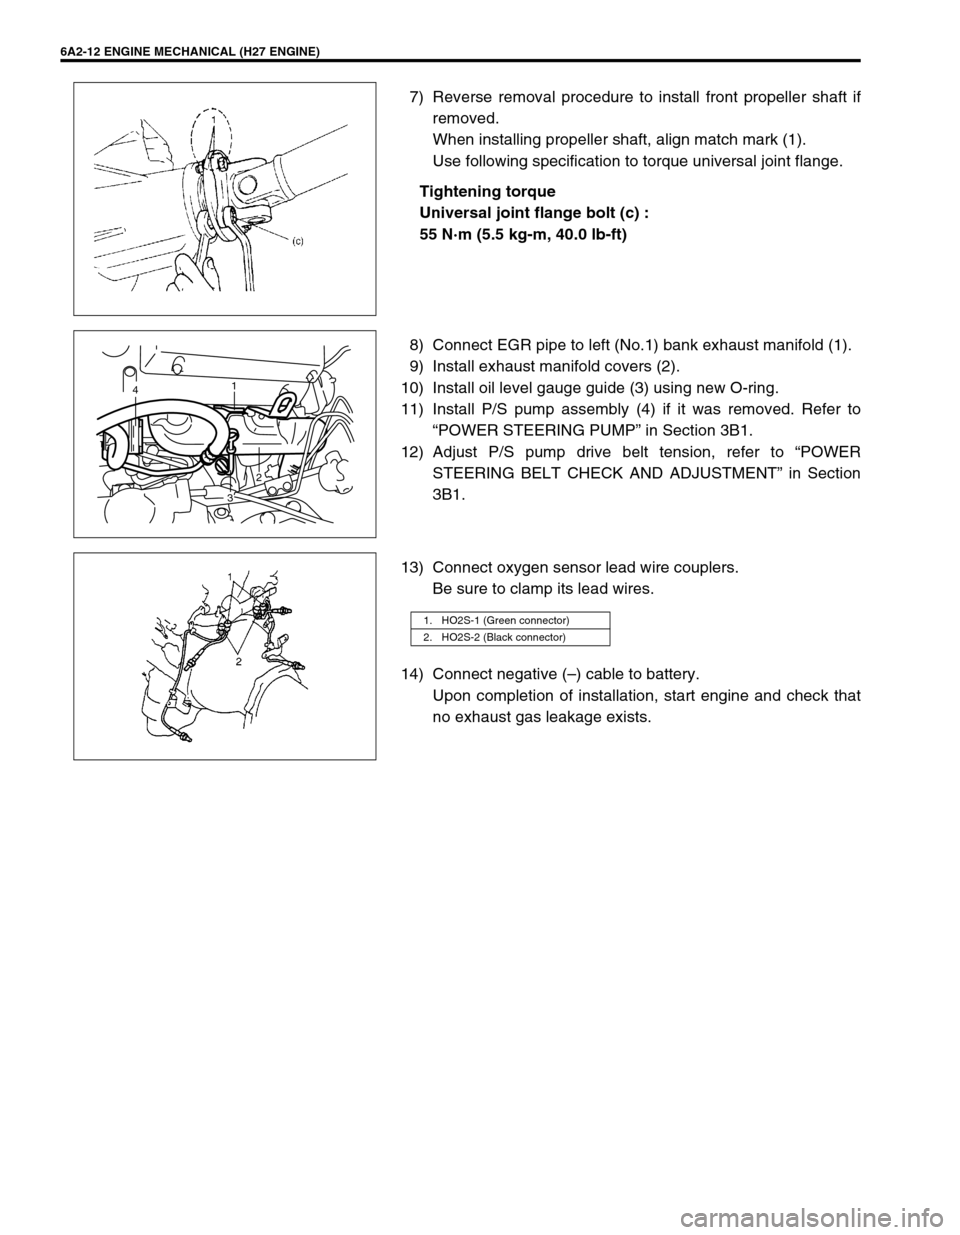 SUZUKI GRAND VITARA 2001 2.G Owners Manual 6A2-12 ENGINE MECHANICAL (H27 ENGINE)
7) Reverse removal procedure to install front propeller shaft if
removed.
When installing propeller shaft, align match mark (1).
Use following specification to to